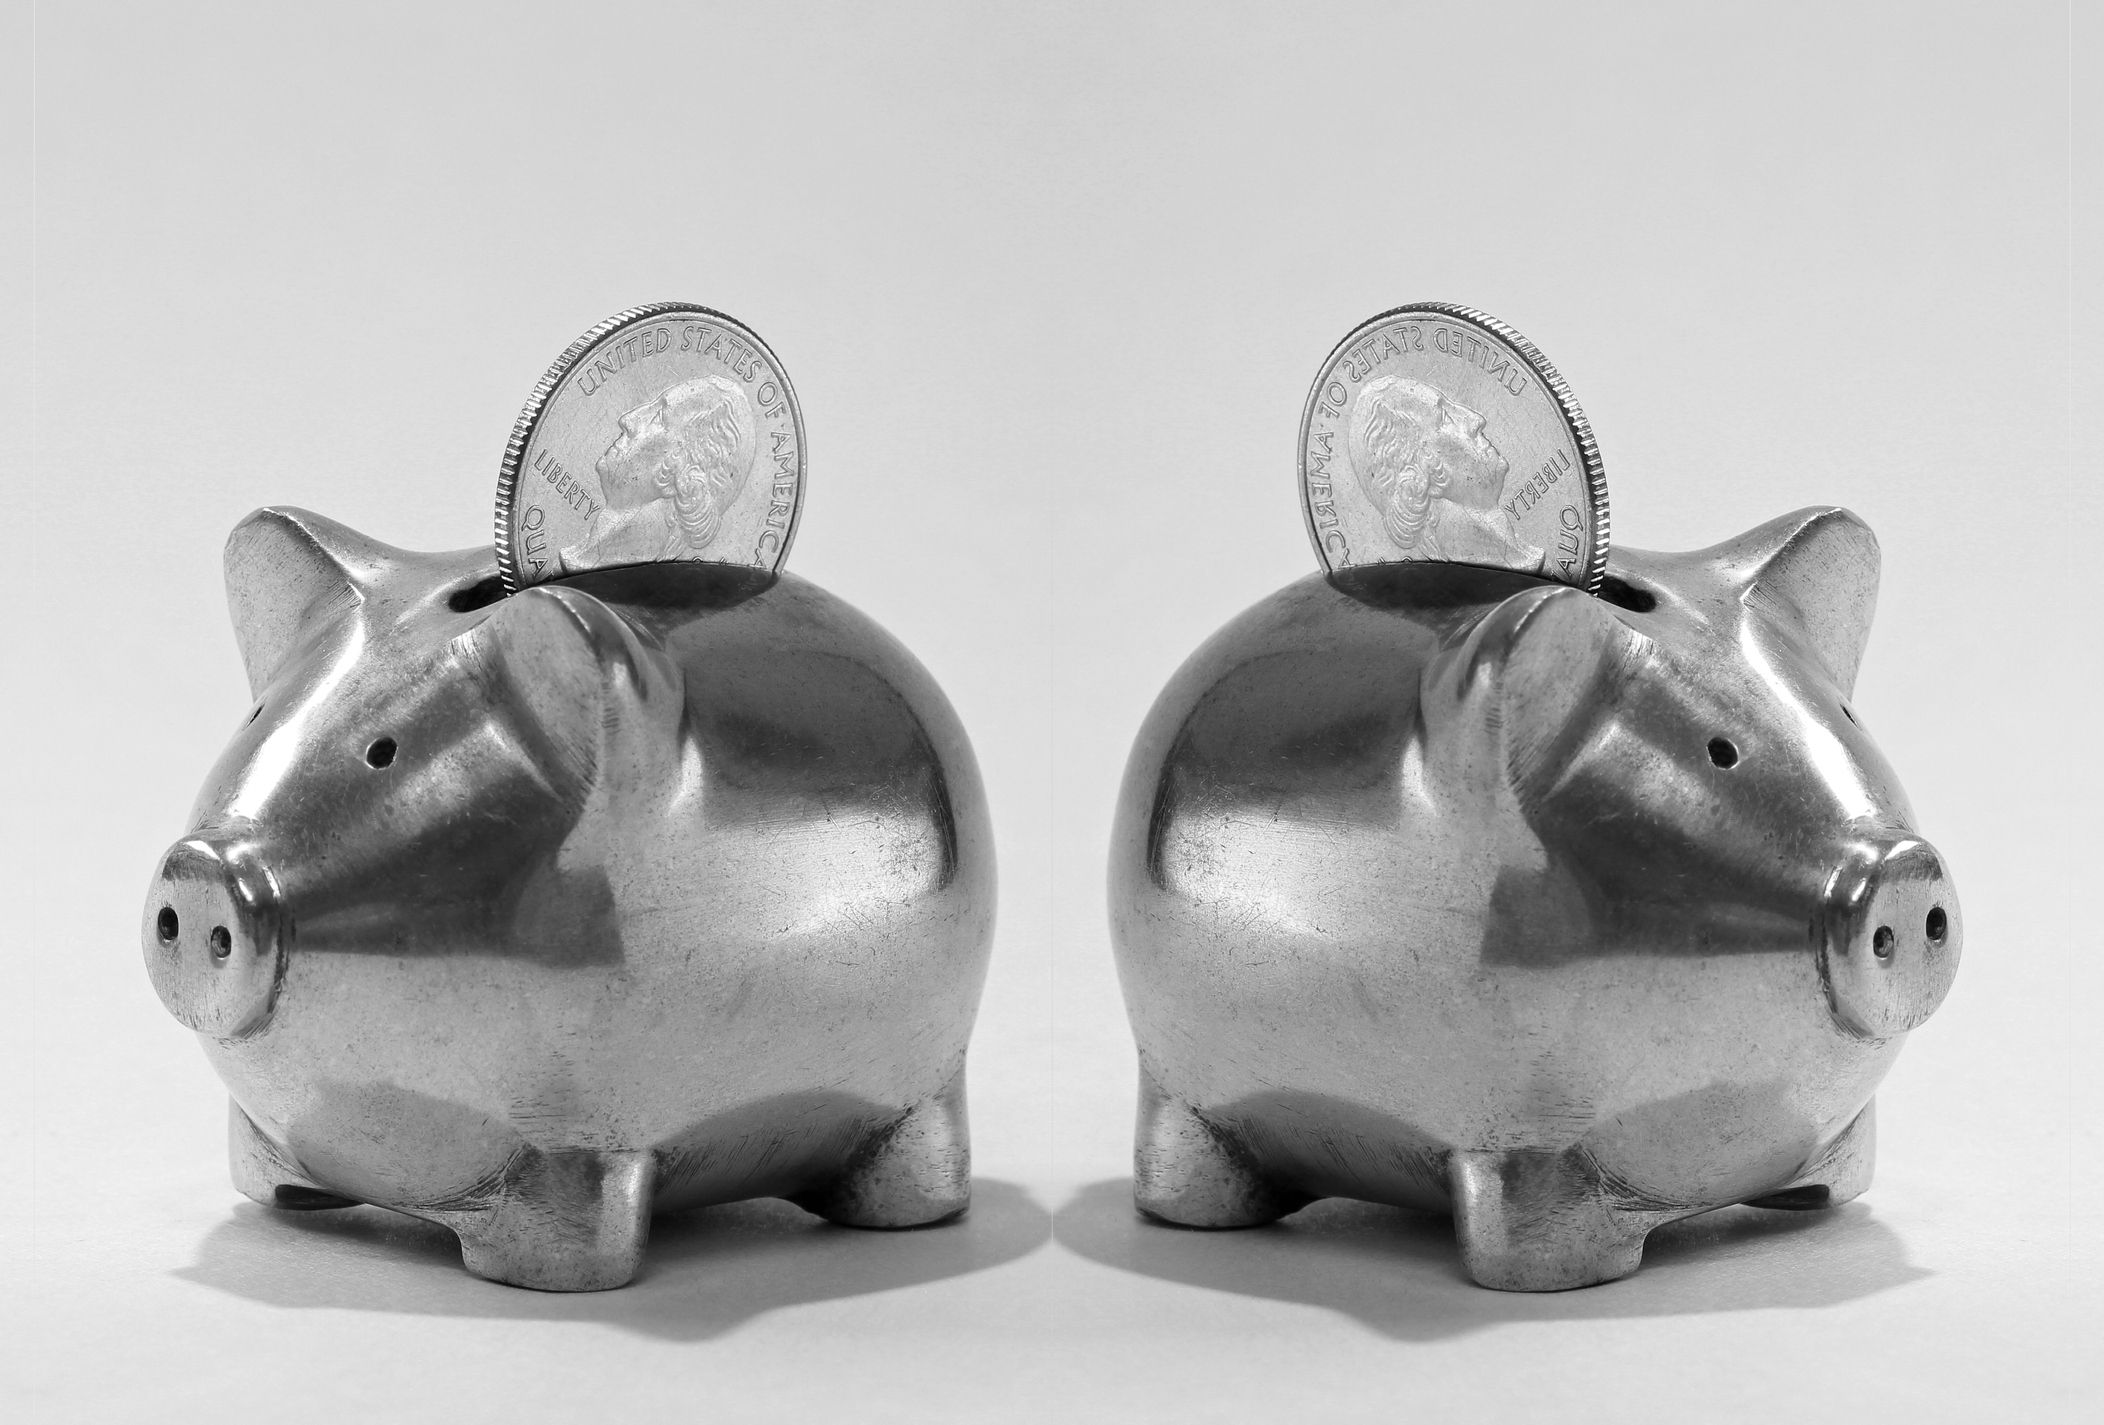 Two silver piggybanks with one silver coin above it on the coin slot